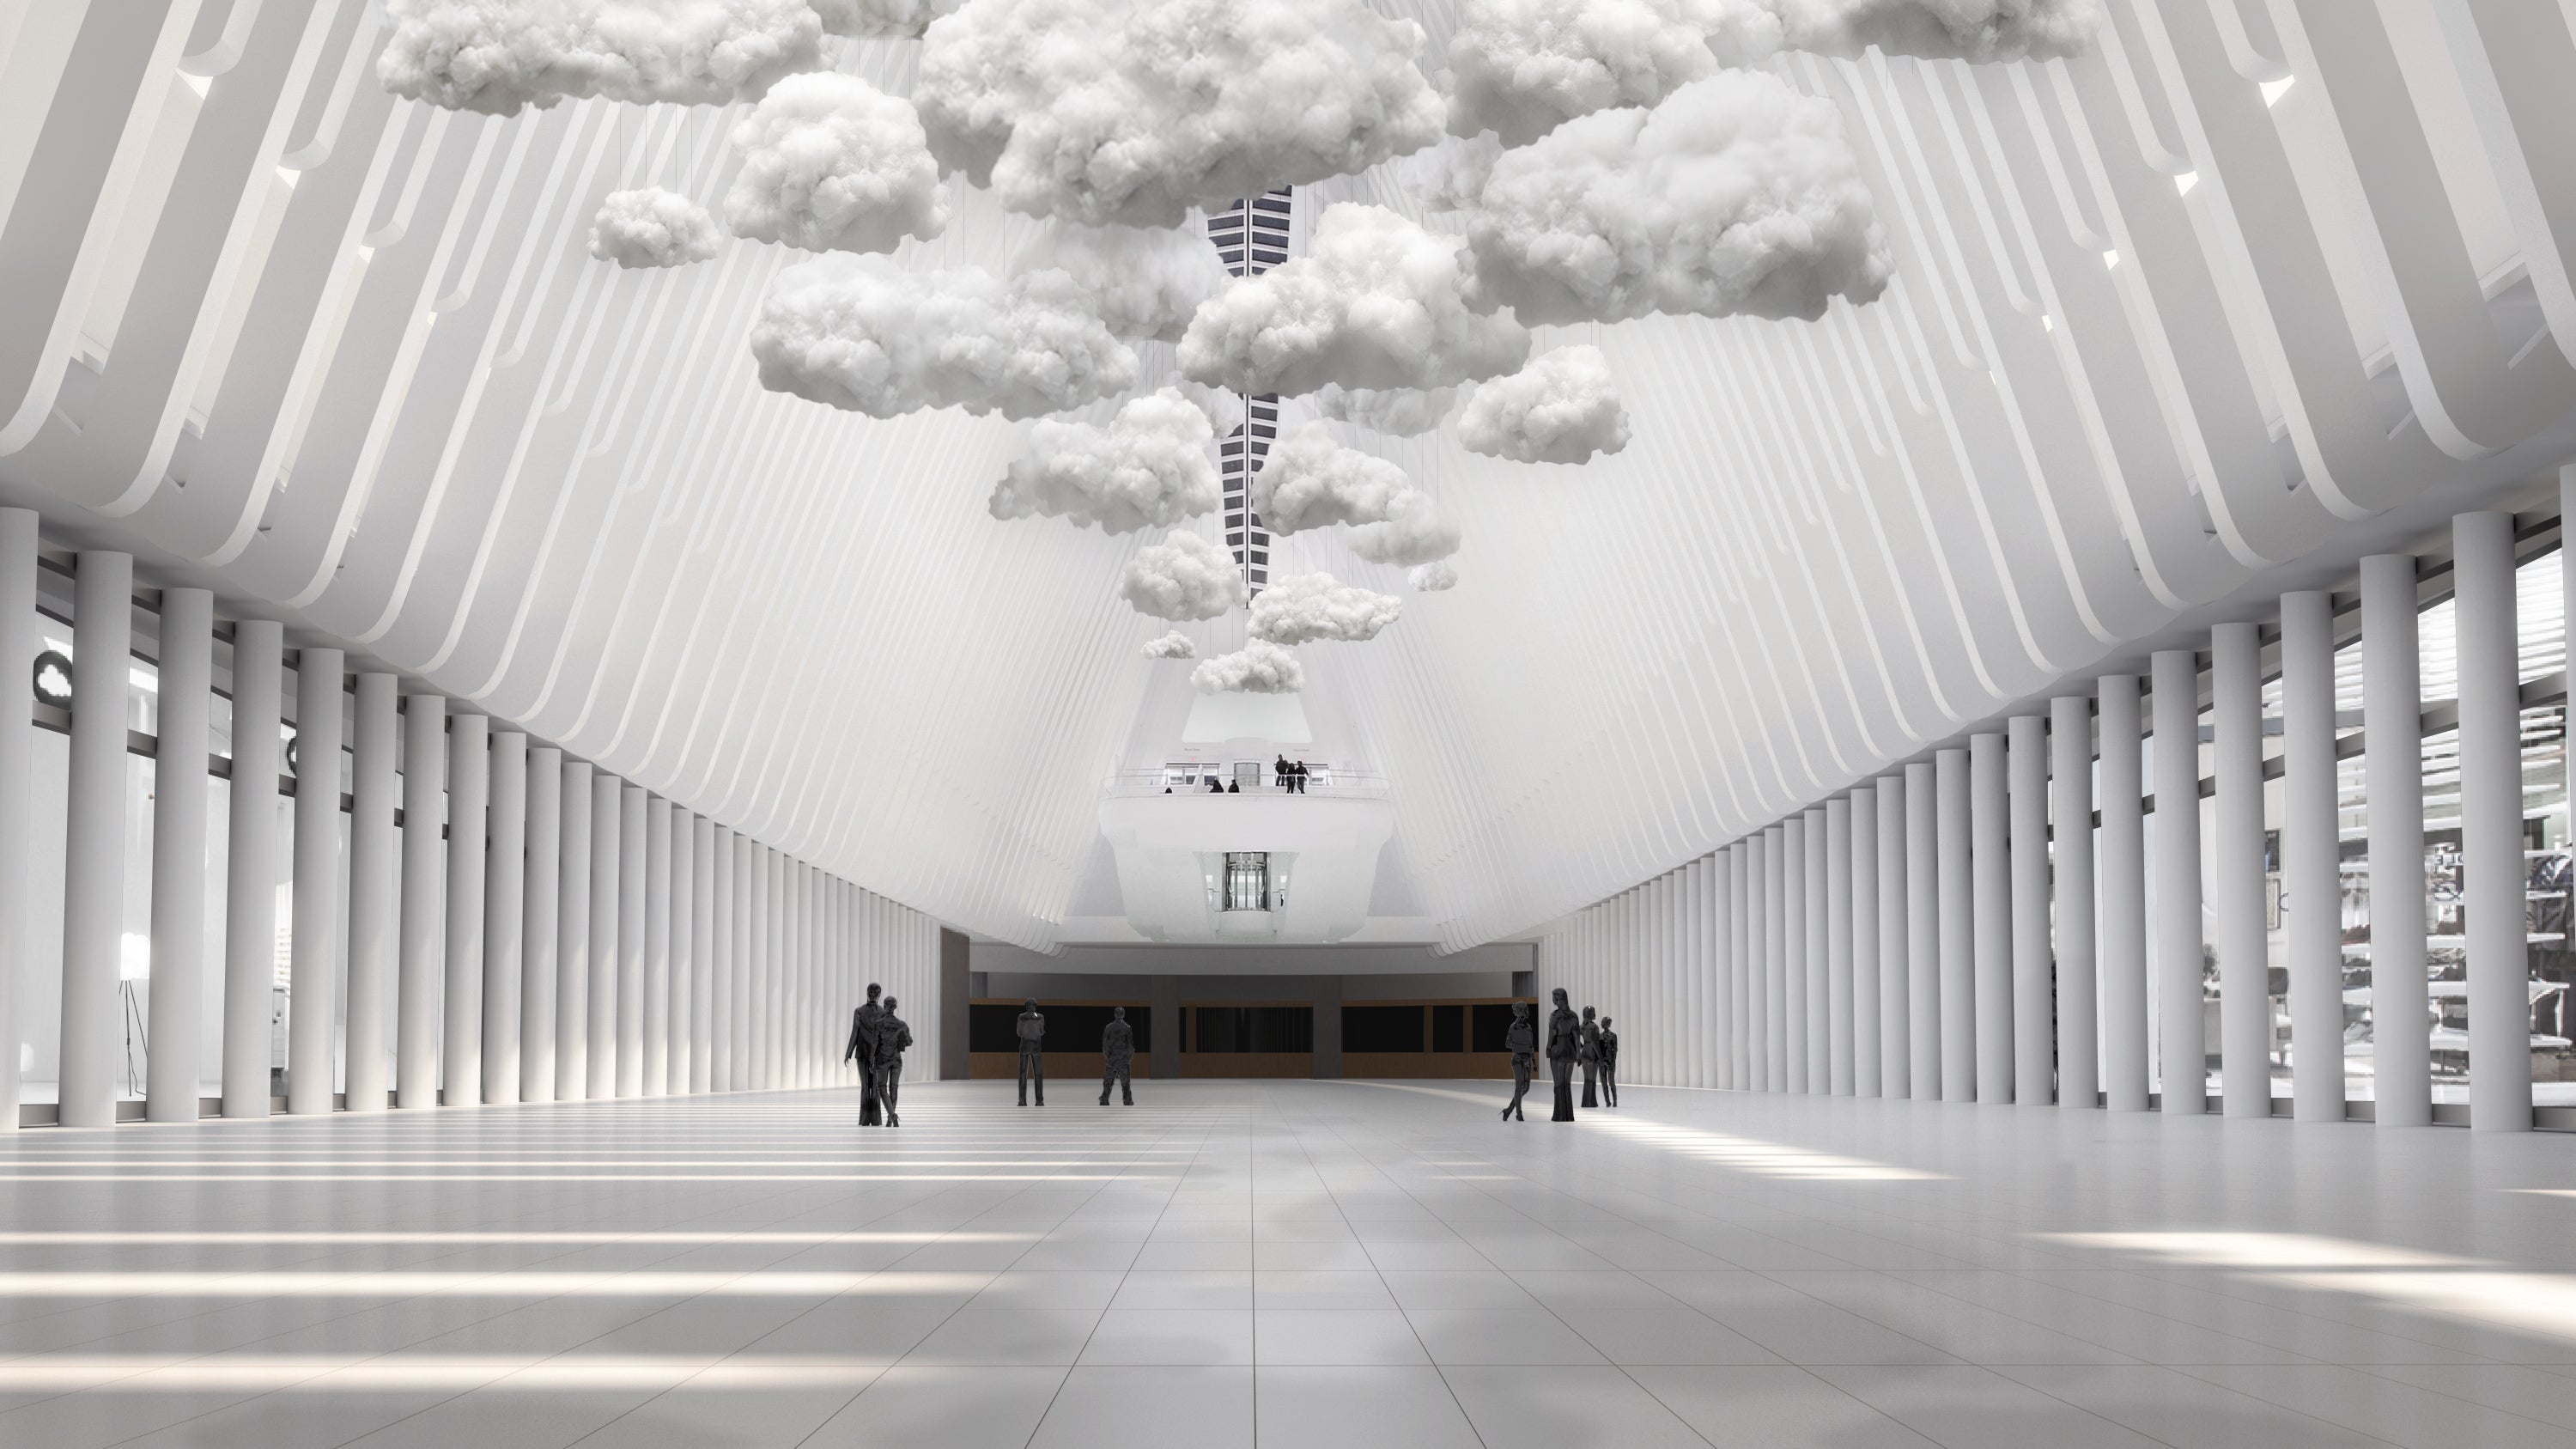 Be Level with Clouds at the Oculus – Clarkson Studio